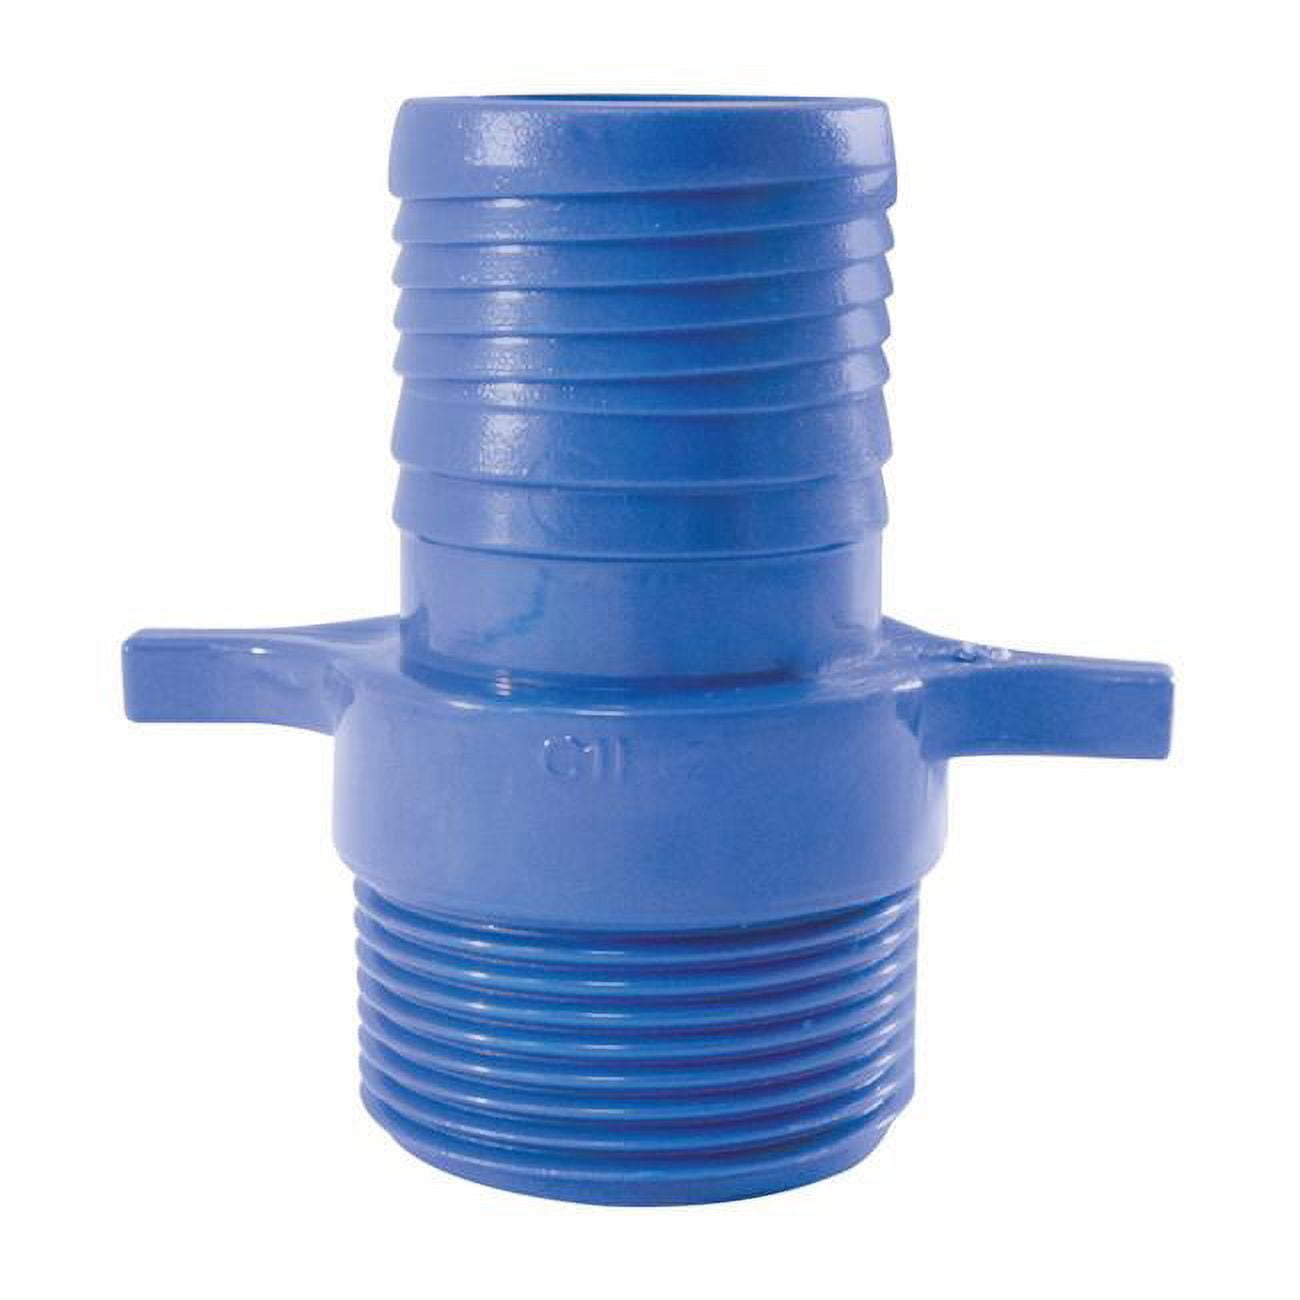 4814752 1.25 In. Insert X 1.25 In. Dia. Mpt Polypropylene Male Adapter, Blue